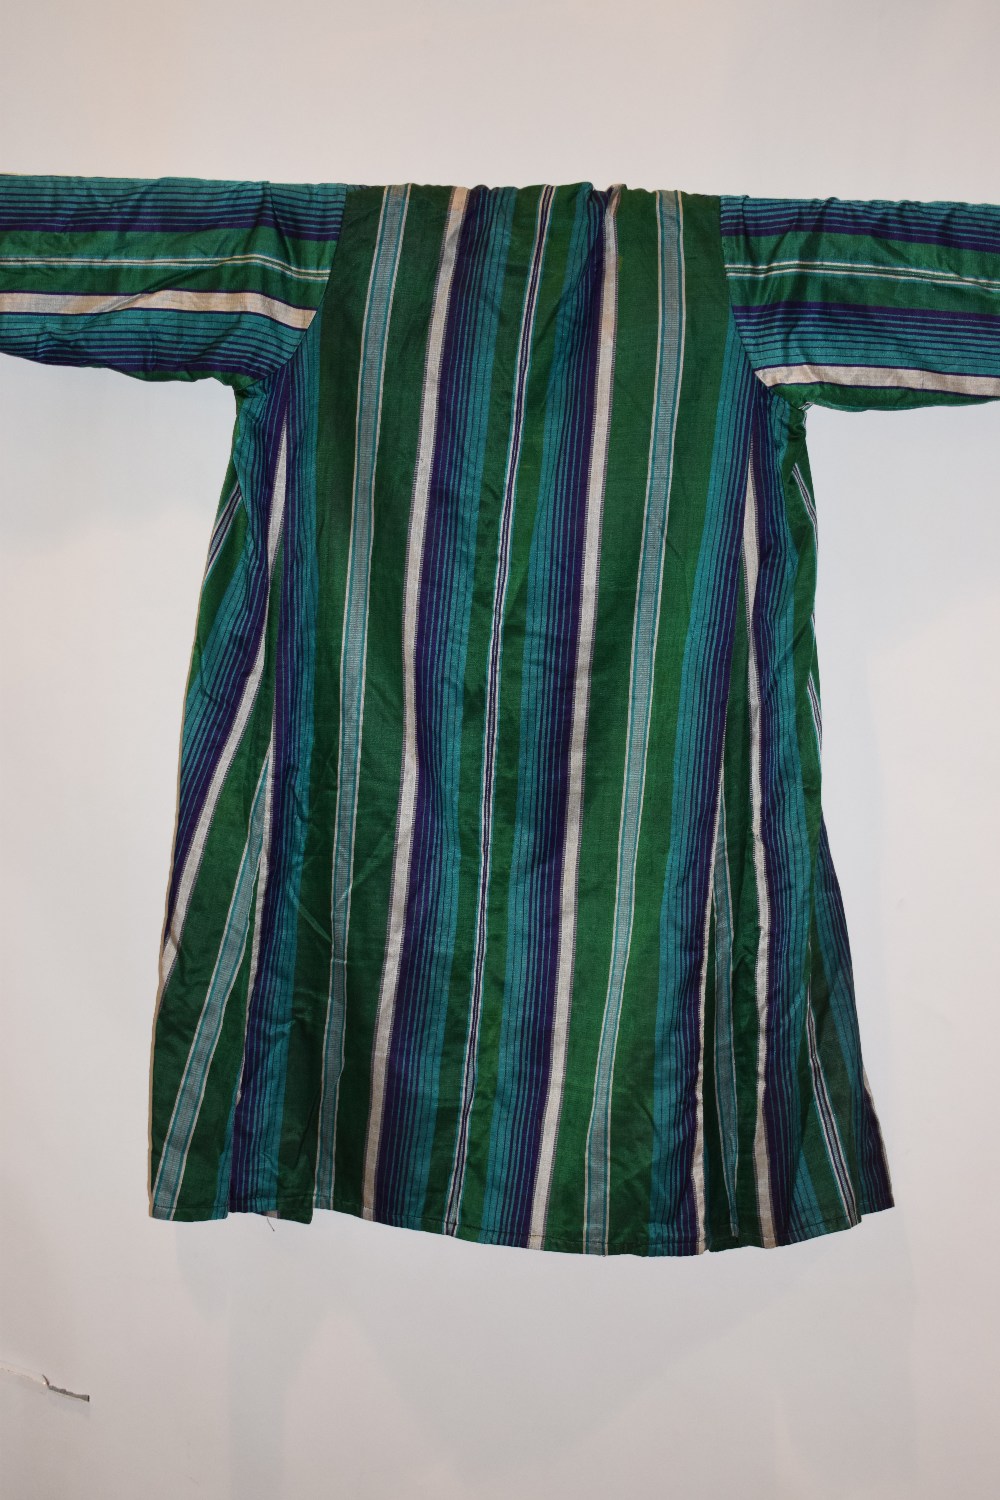 Two Uzbekistan or Afghanistan coats, 20th century, one silk satin with stripes in shades of - Image 7 of 16